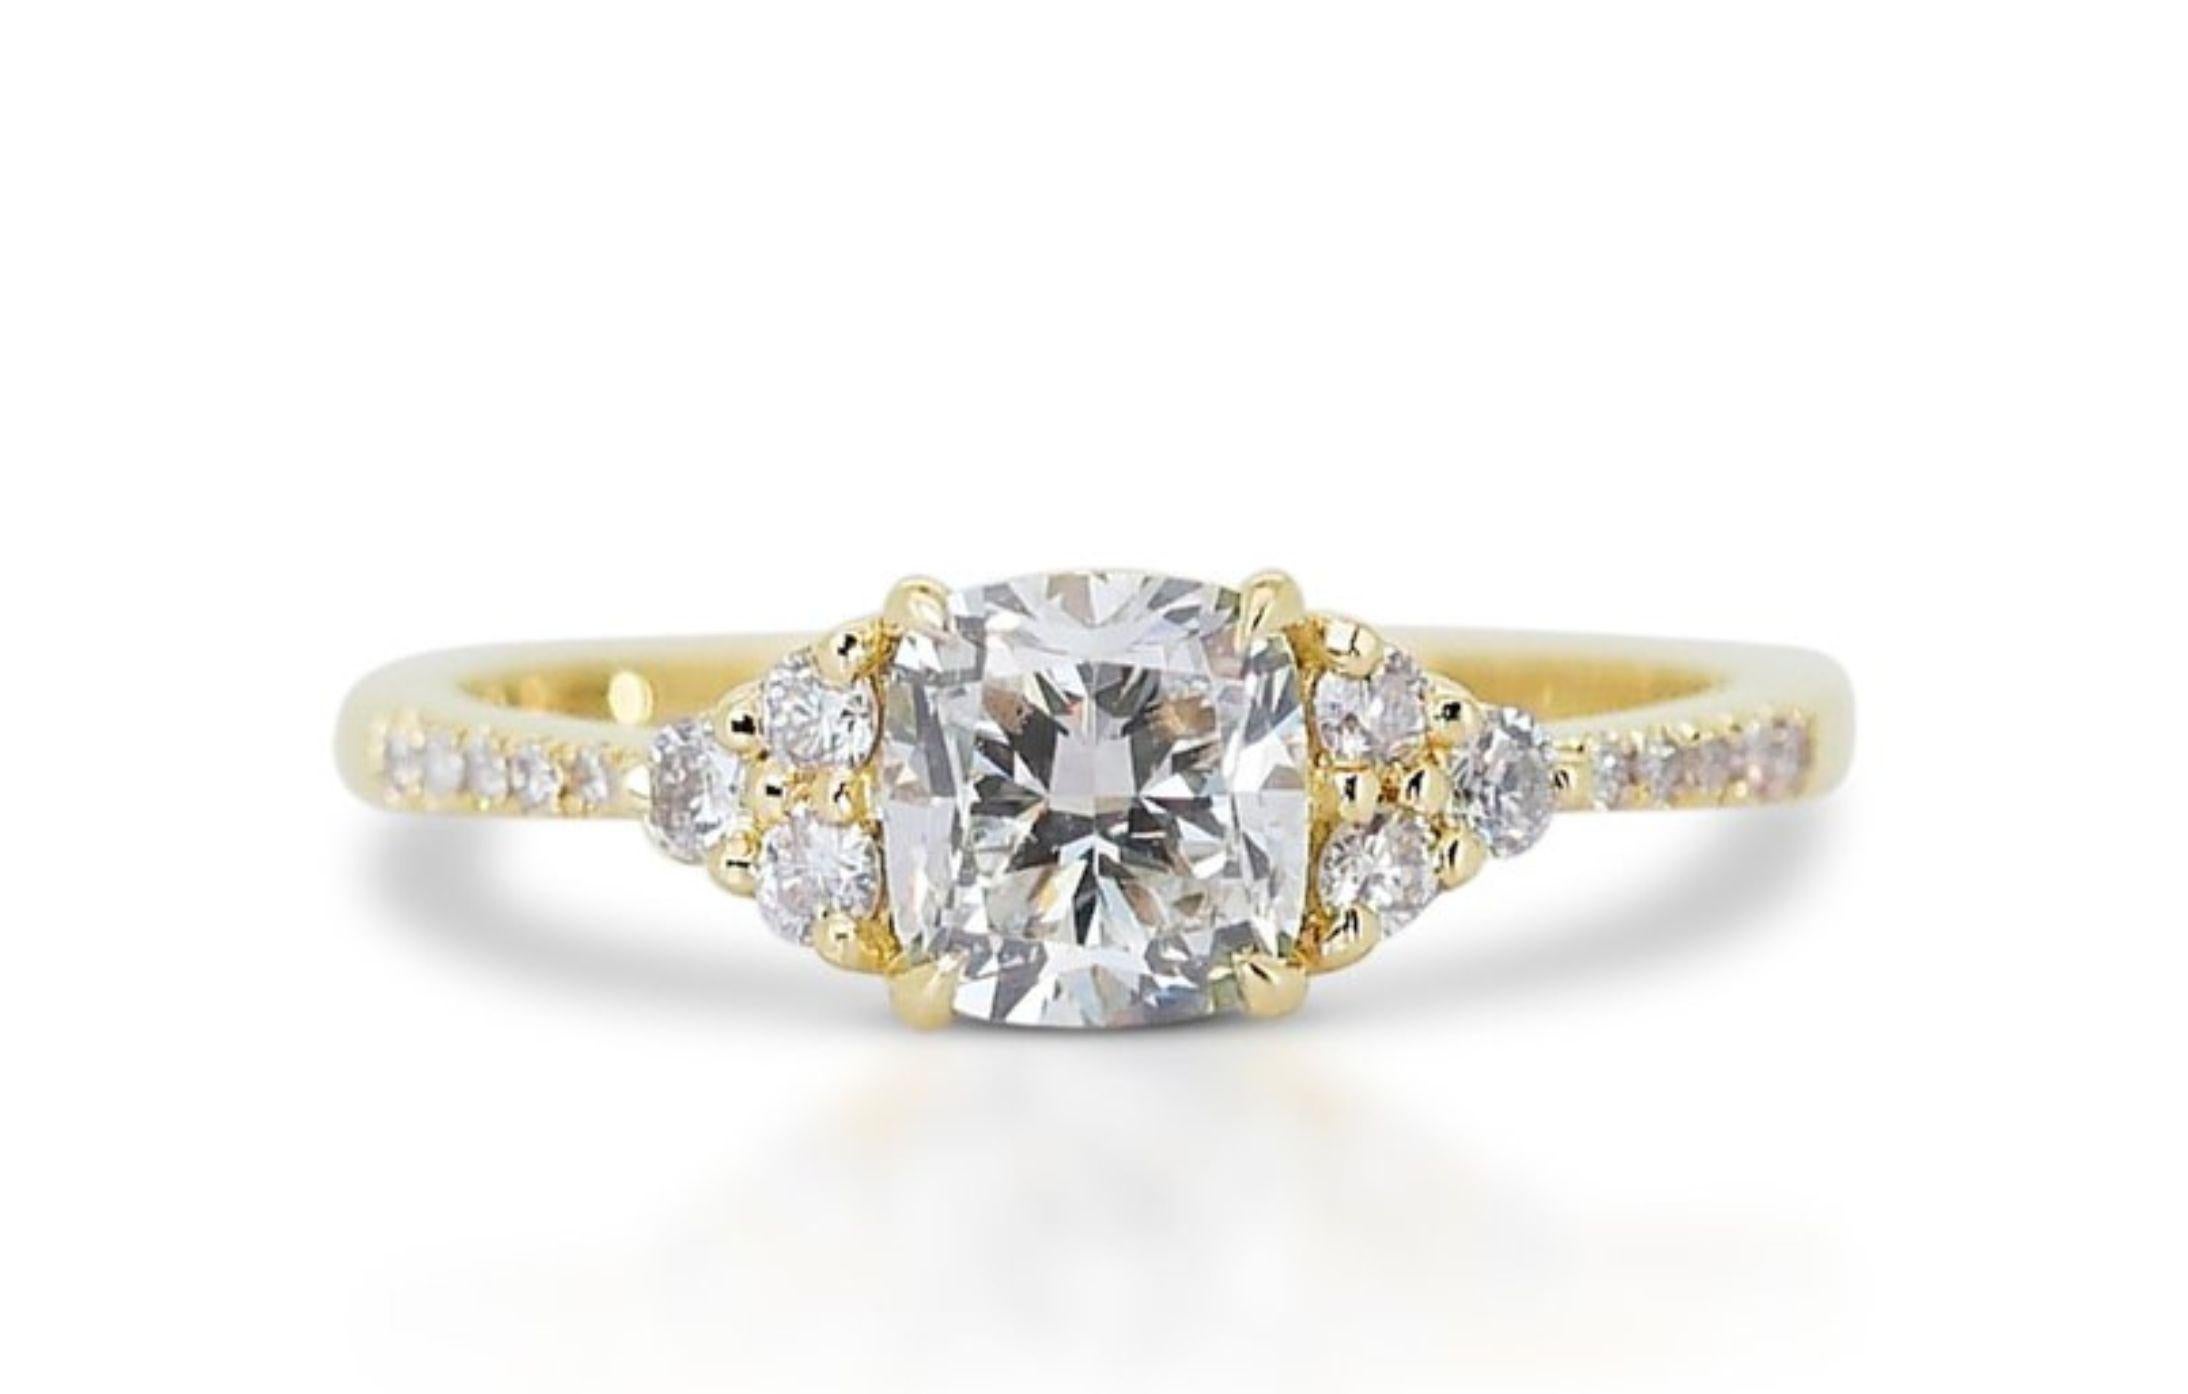 Prepare to be captivated by a ring that embodies the radiant warmth of a sun-kissed summer meadow. This breathtaking creation features a dazzling 1.01 carat cushion-cut diamond, its G color radiating pure, luminous beauty with a hint of golden